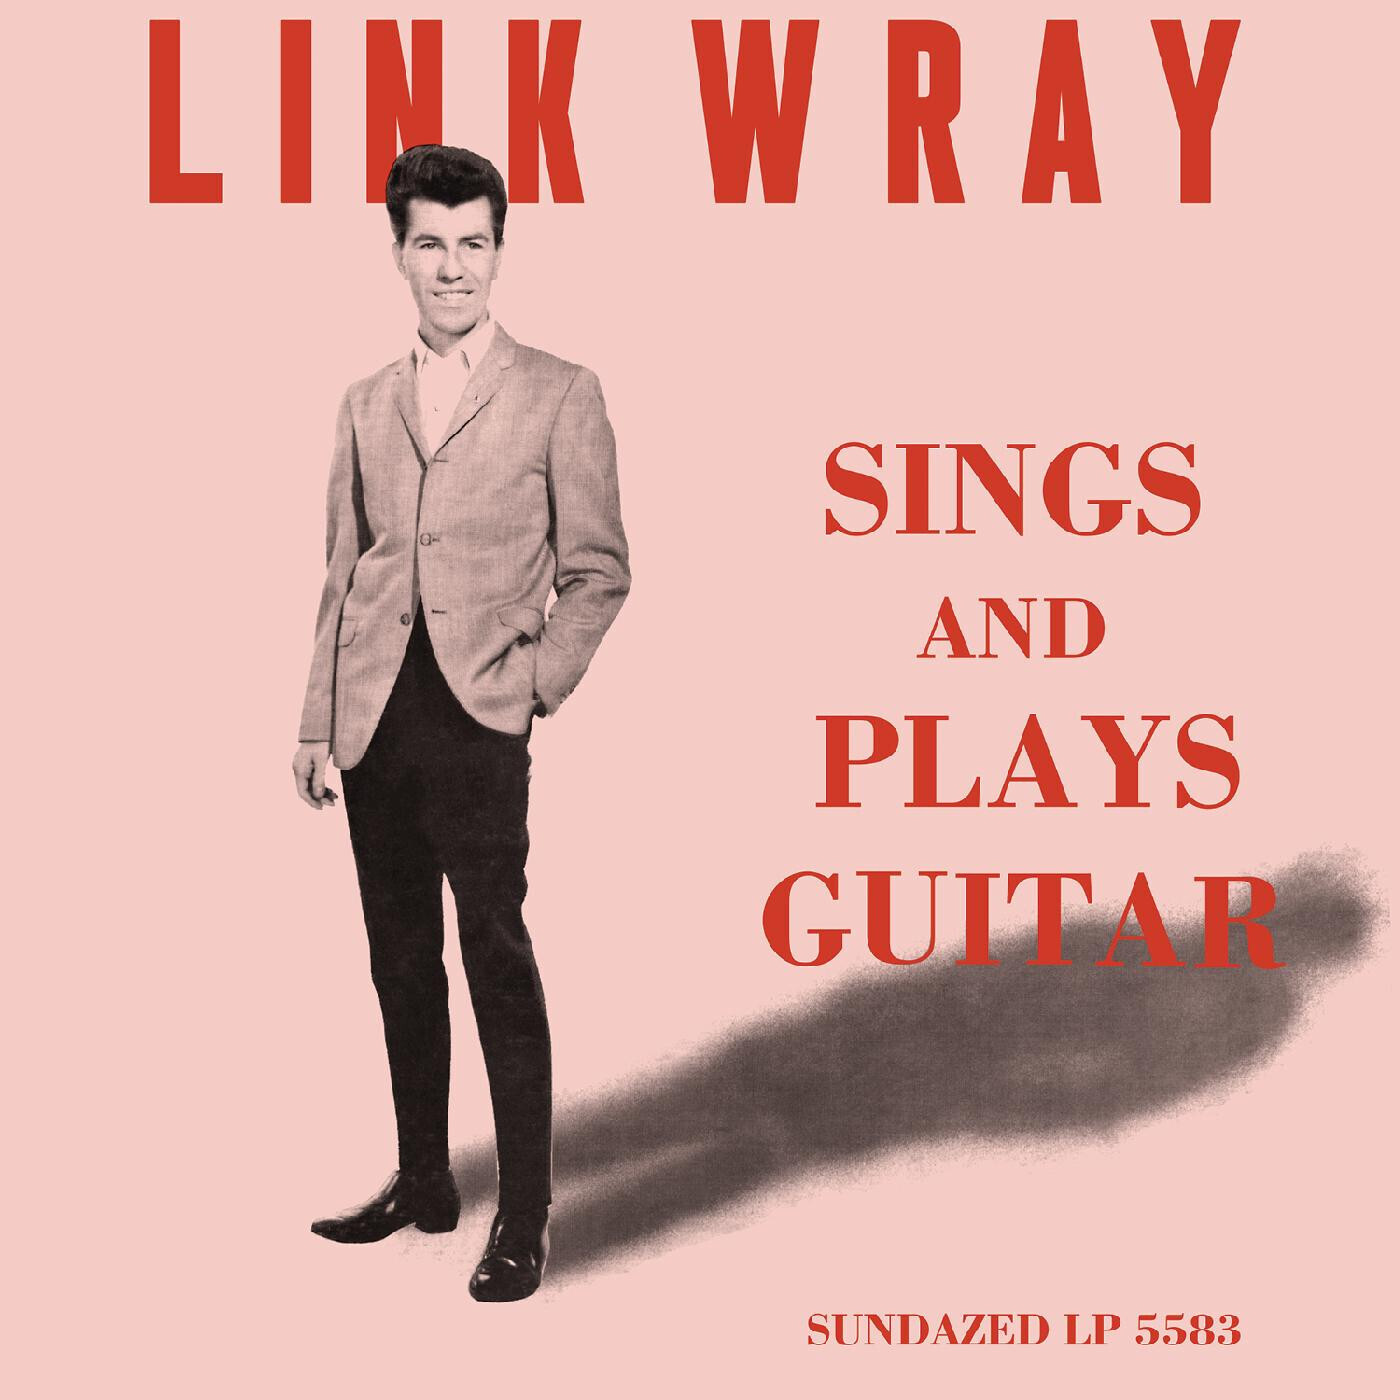 Link Wray "Sings and Plays Guitar"